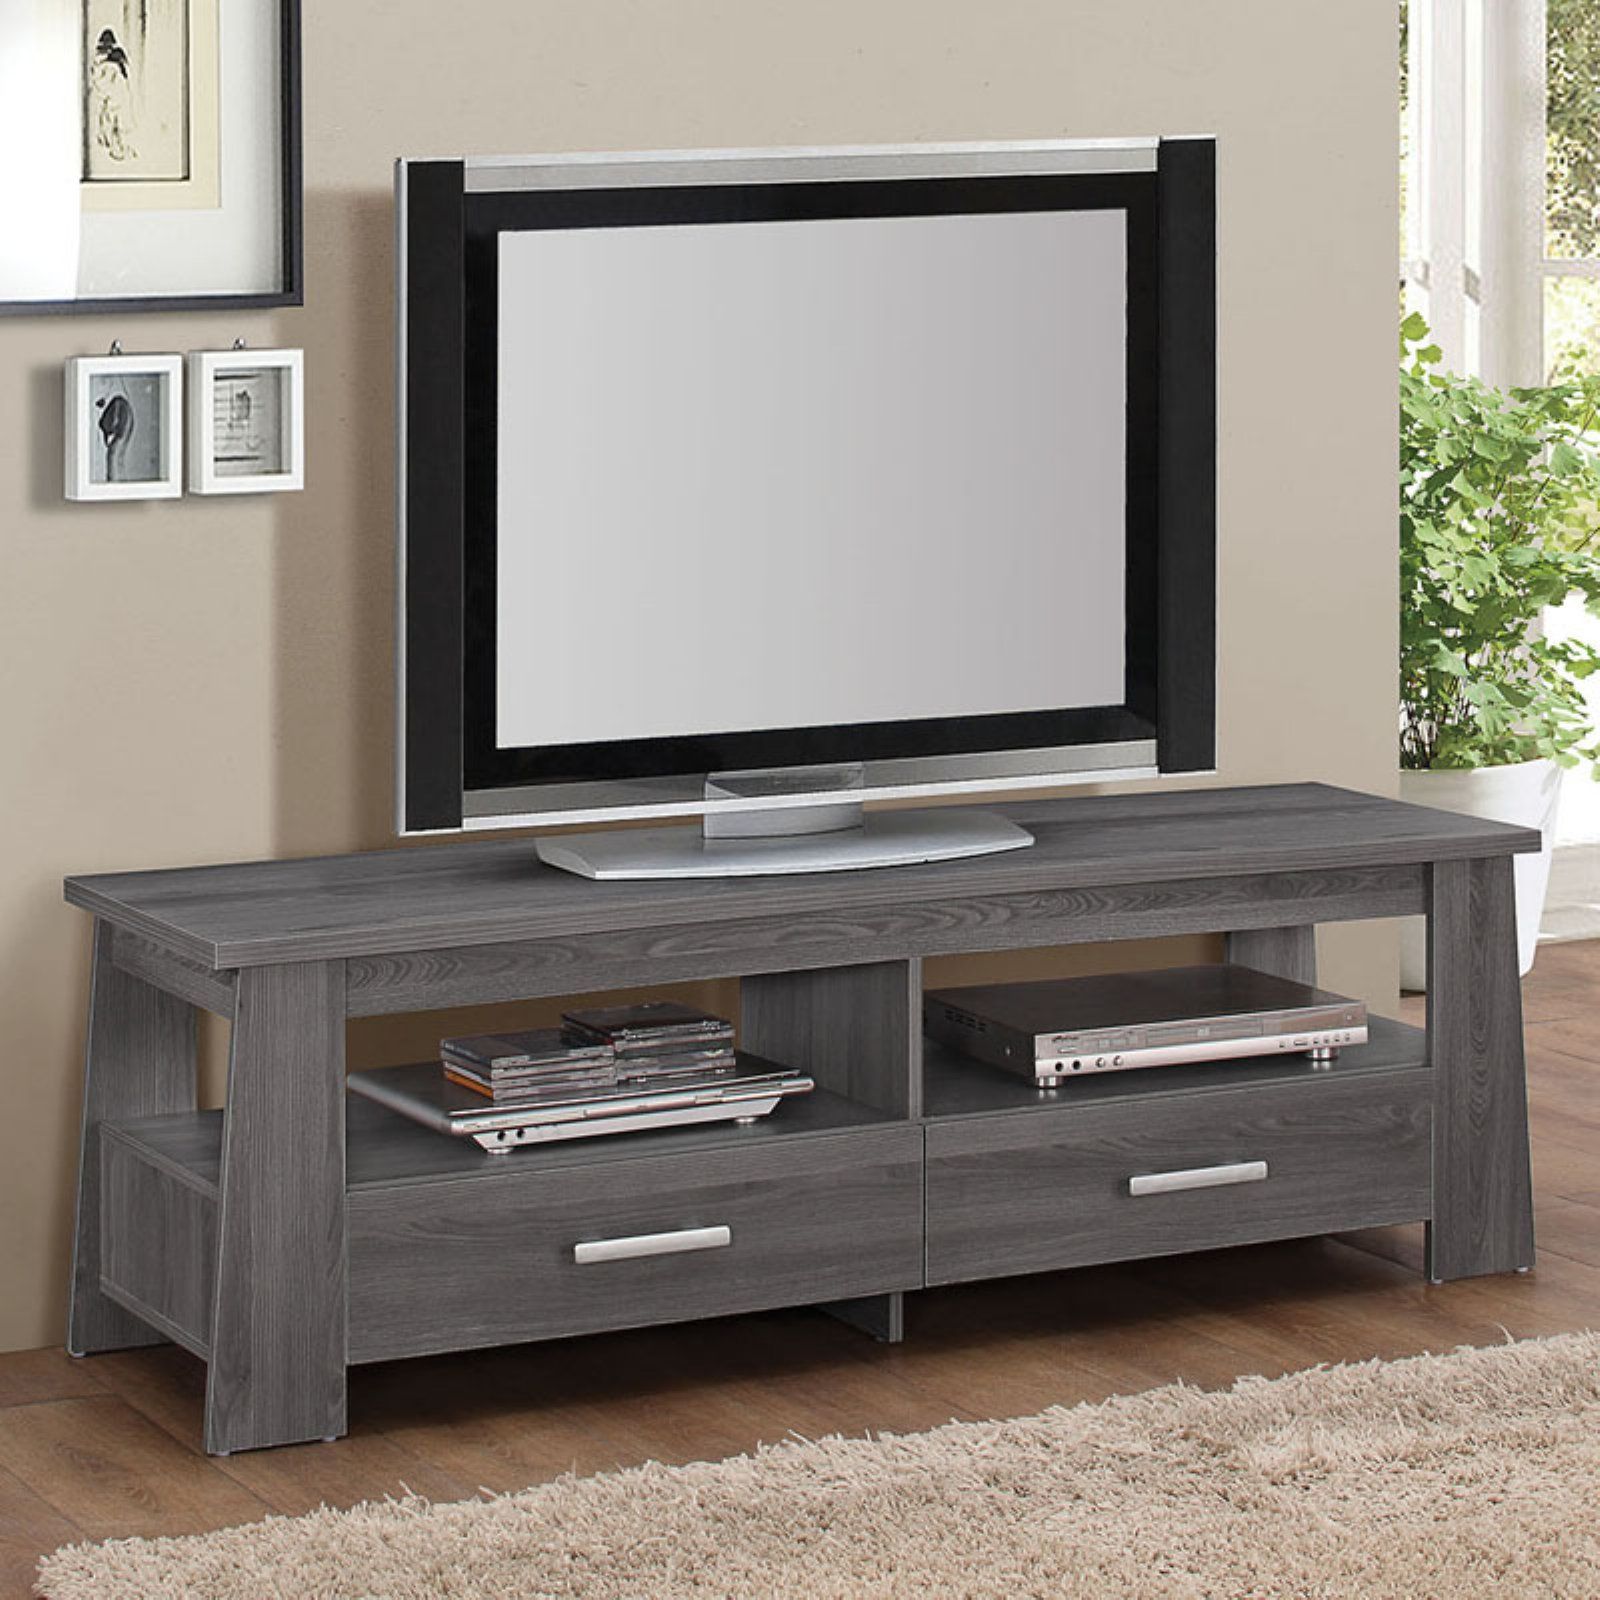 Acme Falan Dark Gray Oak Tv Stand For Flat Screen Tvs Up For Oak Tv Cabinets For Flat Screens (View 3 of 12)